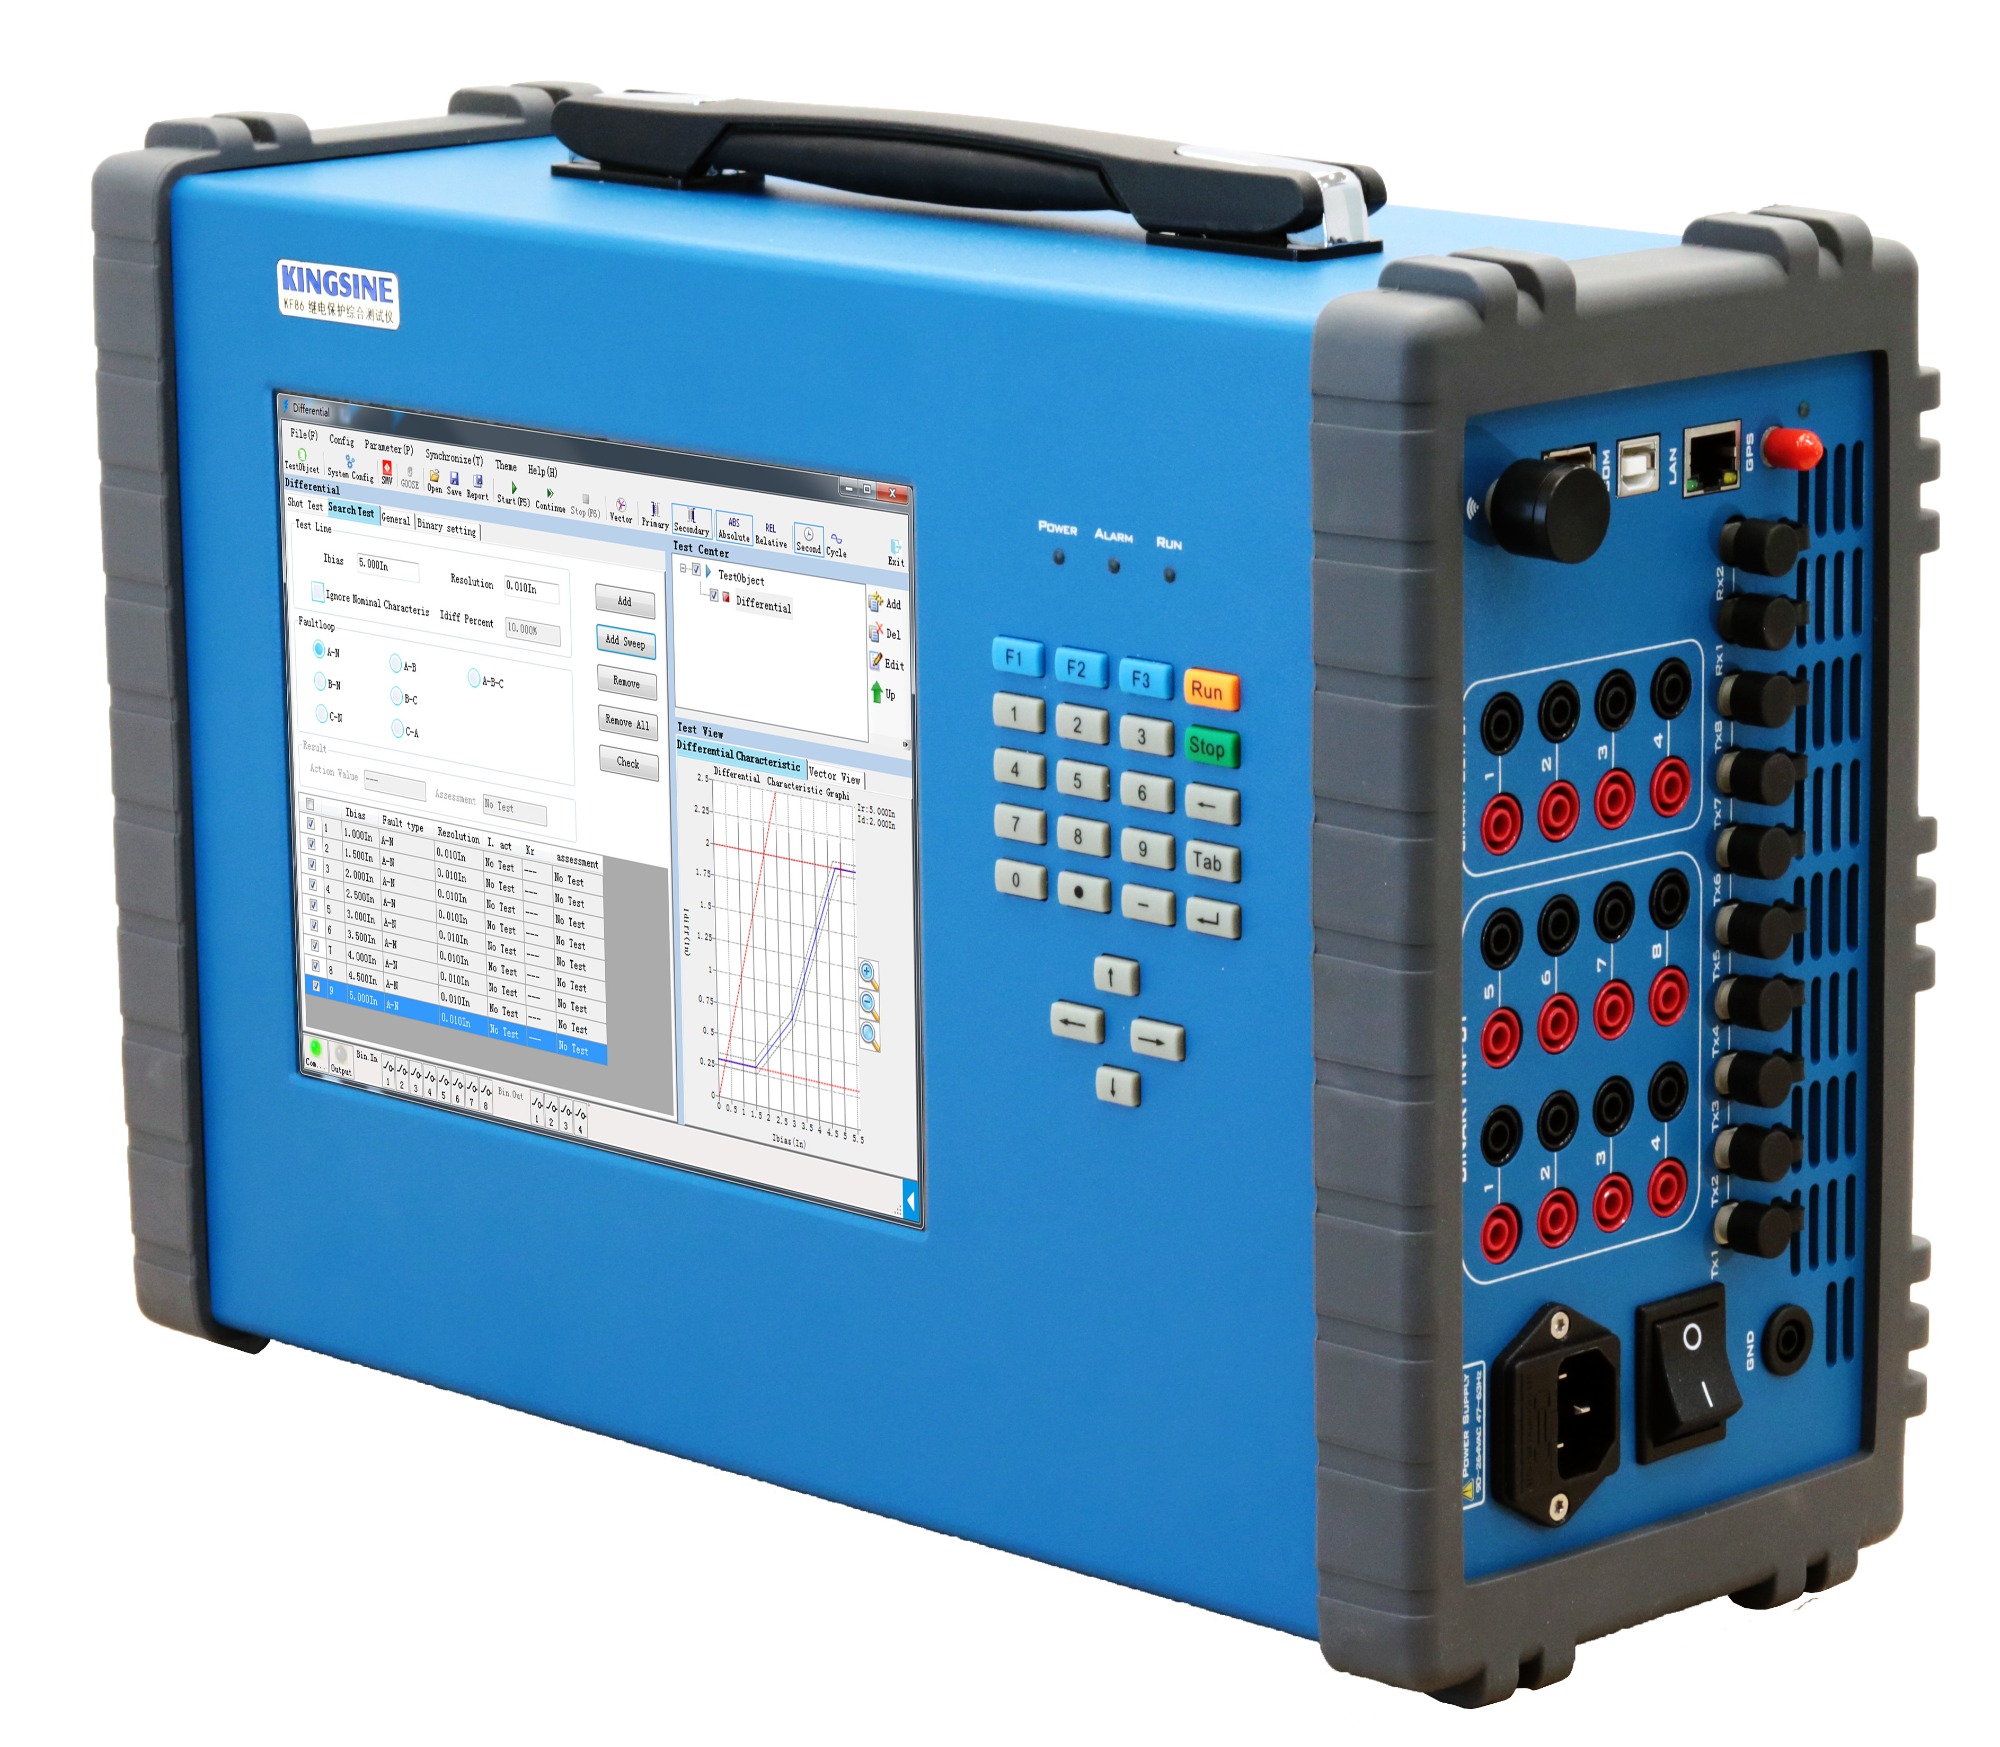 The World’s Lightest & High Power Portable Universal Relay Tester Is Born